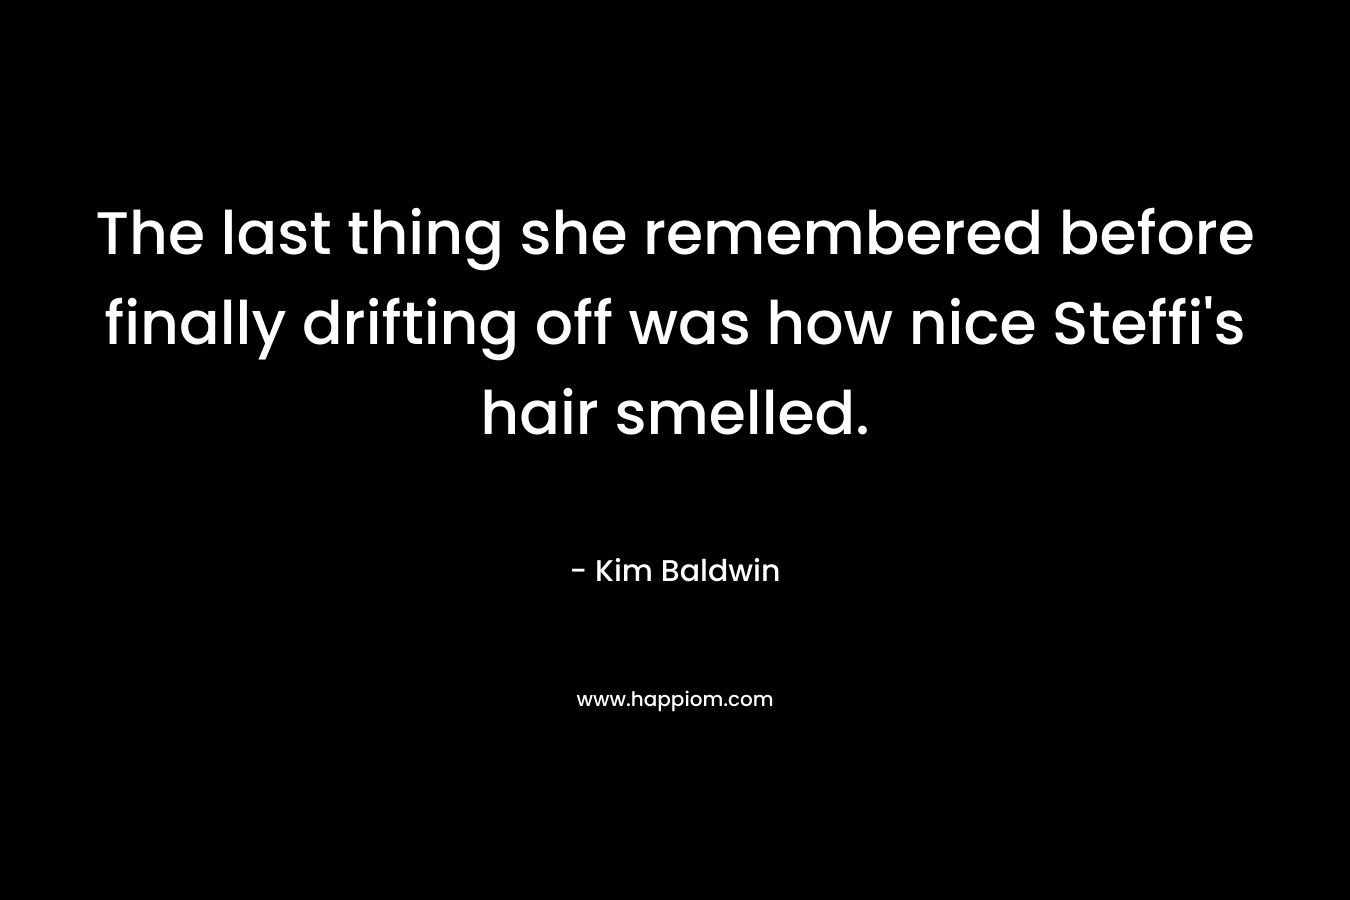 The last thing she remembered before finally drifting off was how nice Steffi’s hair smelled. – Kim Baldwin